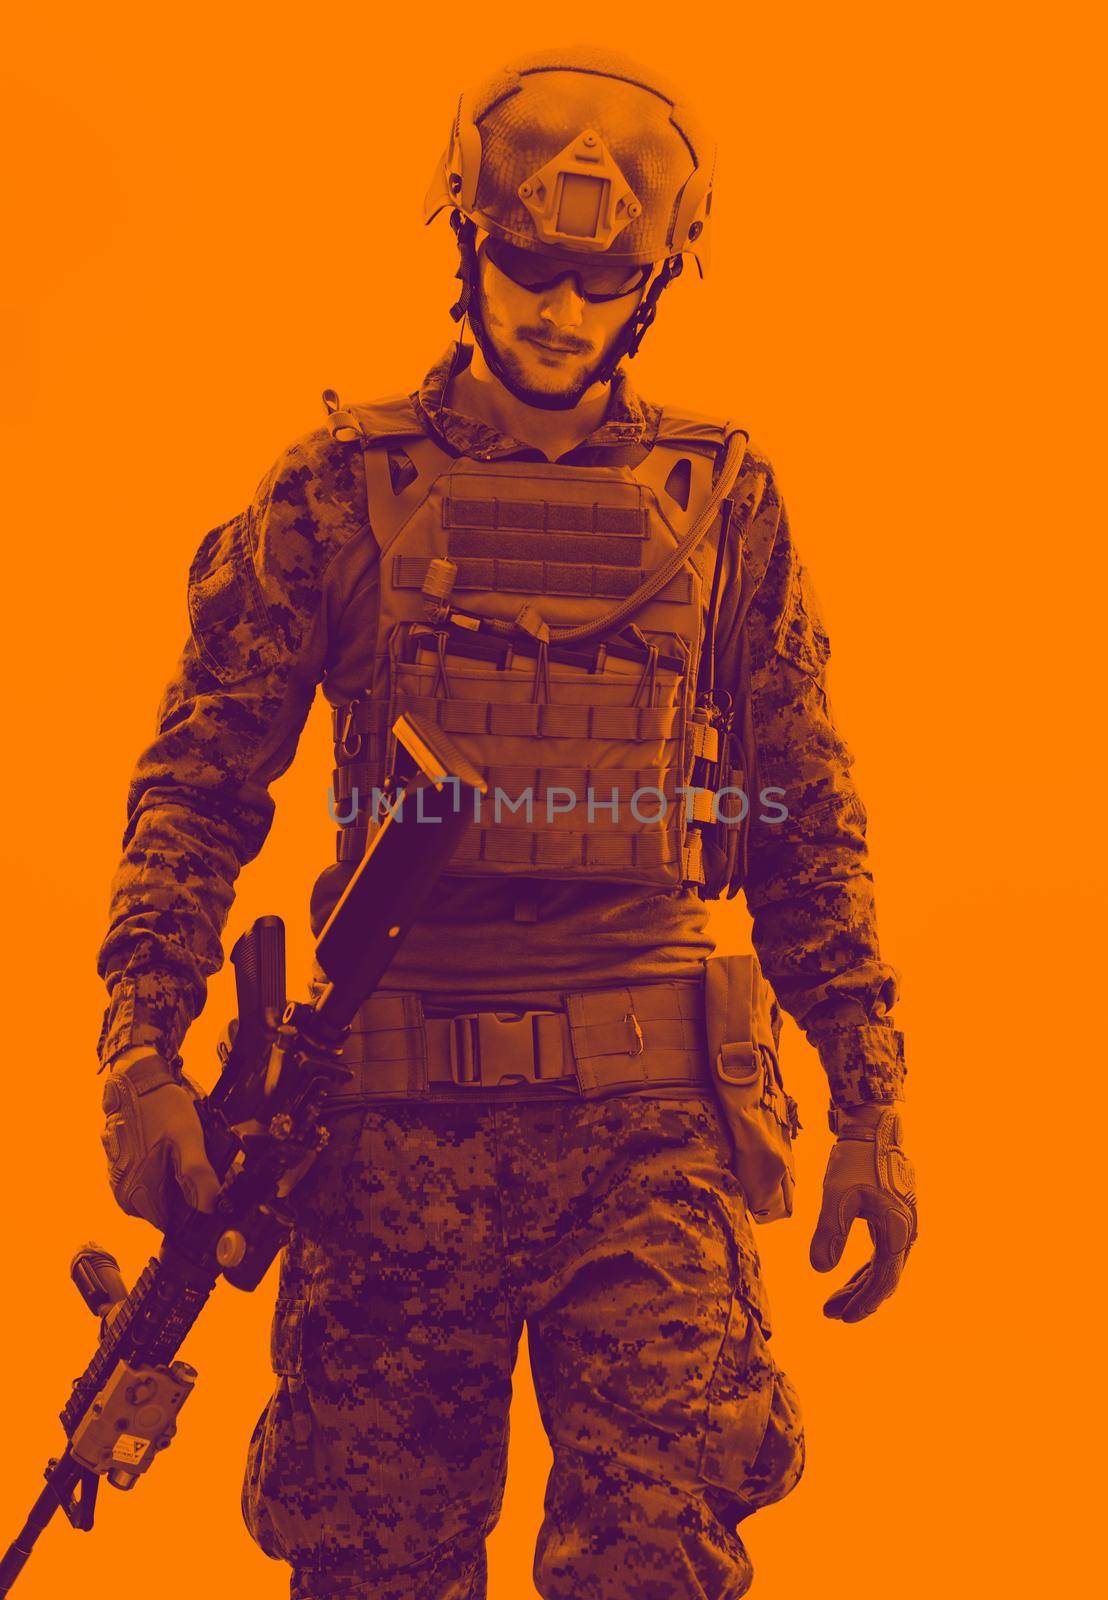 american  marine corps special operations soldier with fire arm weapon and protective army tactical gear with glitch computer error effect